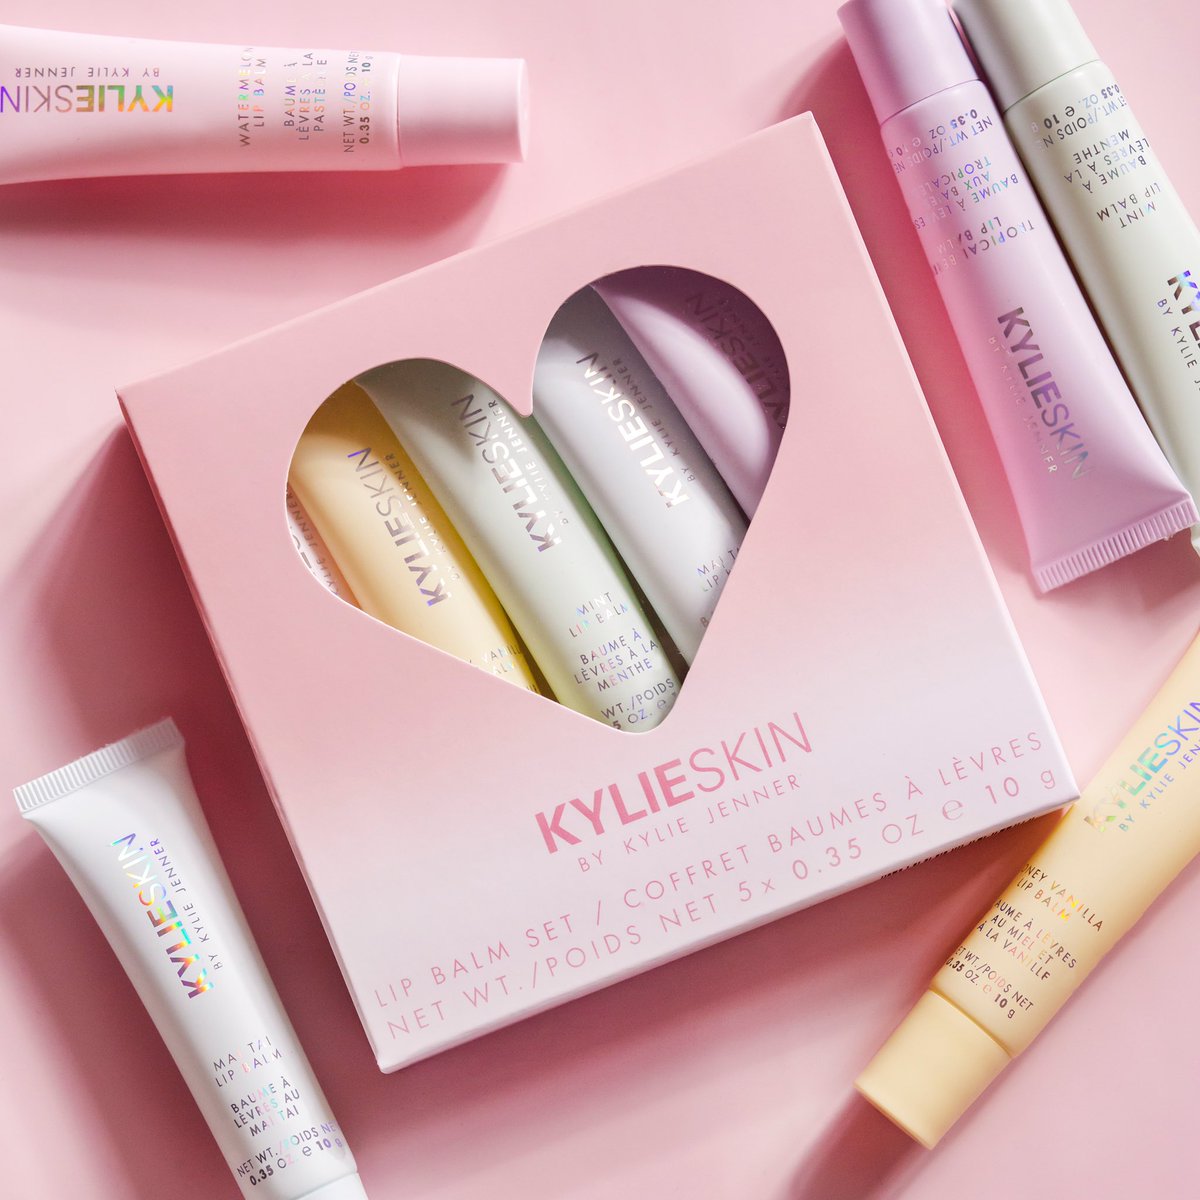 my @kylieskin limited-edition glossy lip balm sets are BACK!!  